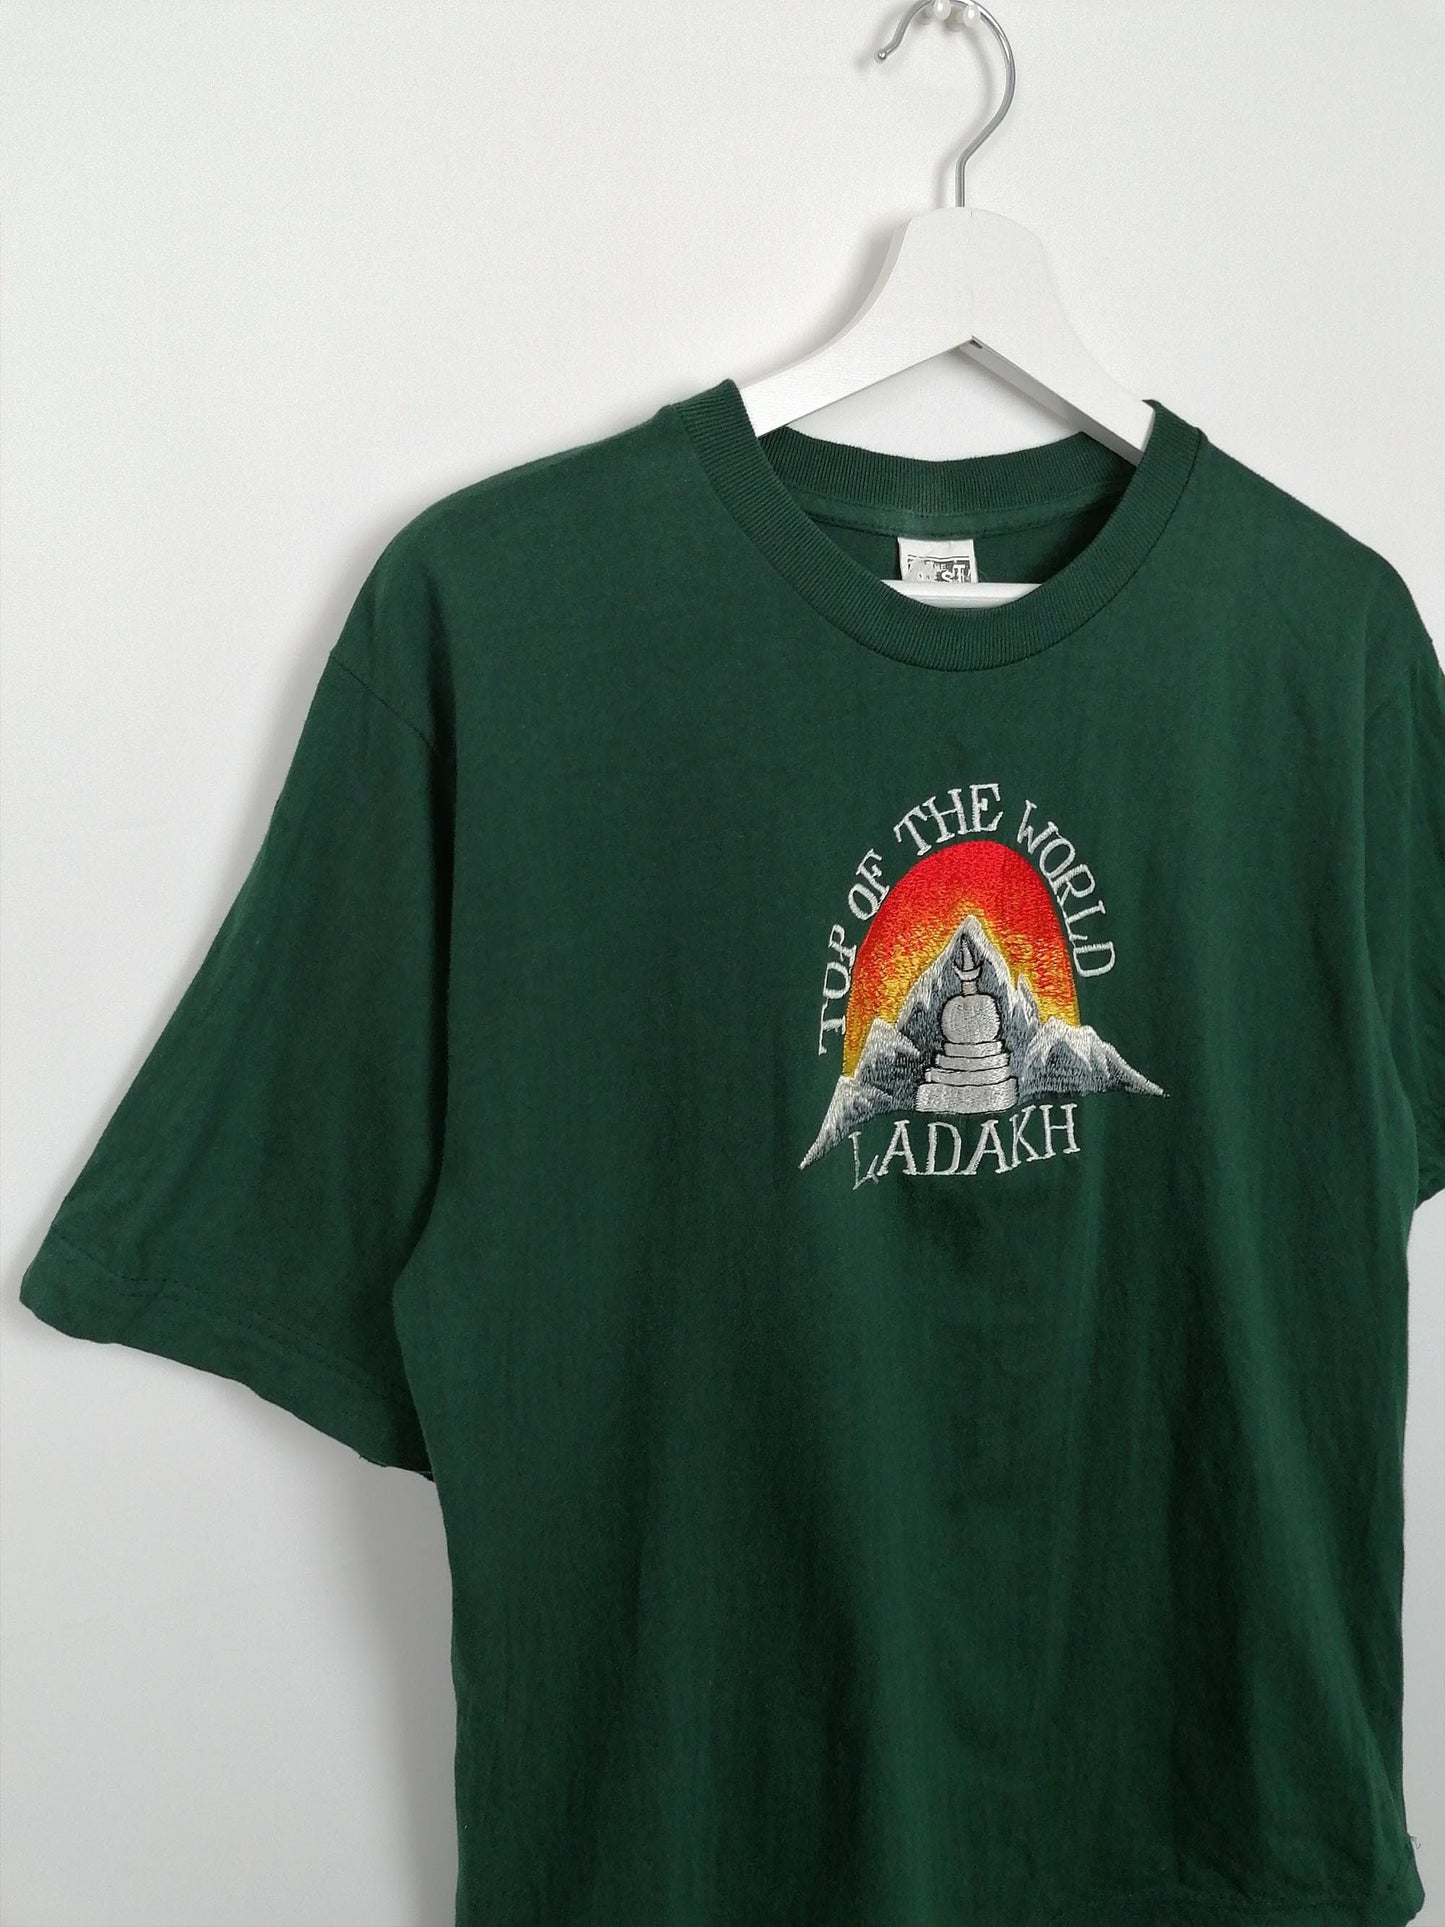 90's 'Top Of The World' Ladakh India T-Shirt - size S-M